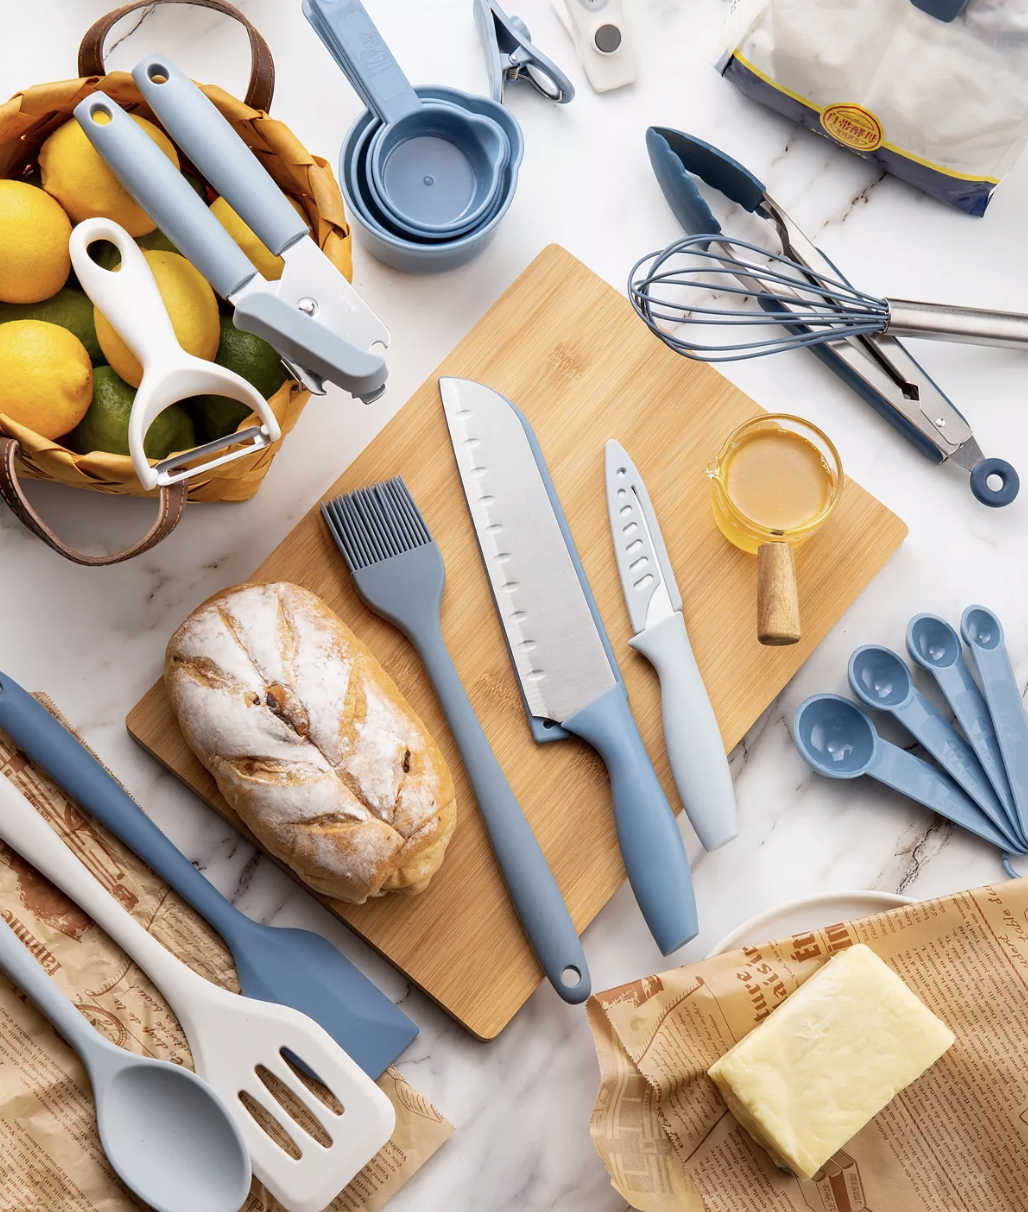 Home chefs are going gaga for kitchen gadgets